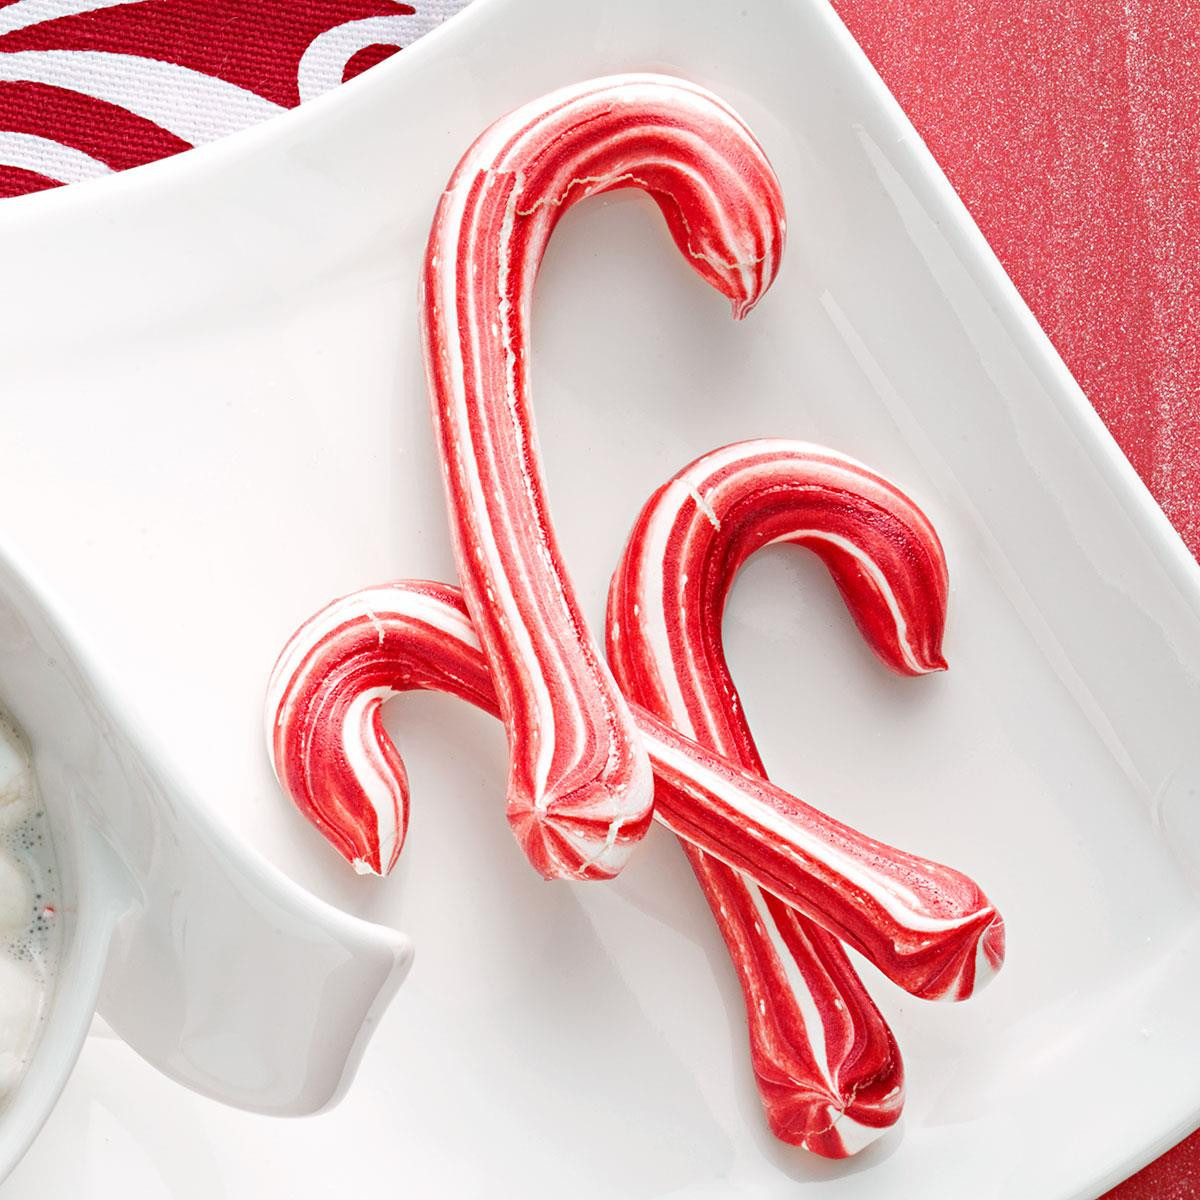 Tastes Like Candy Canes At Christmas
 Meringue Candy Canes Recipe